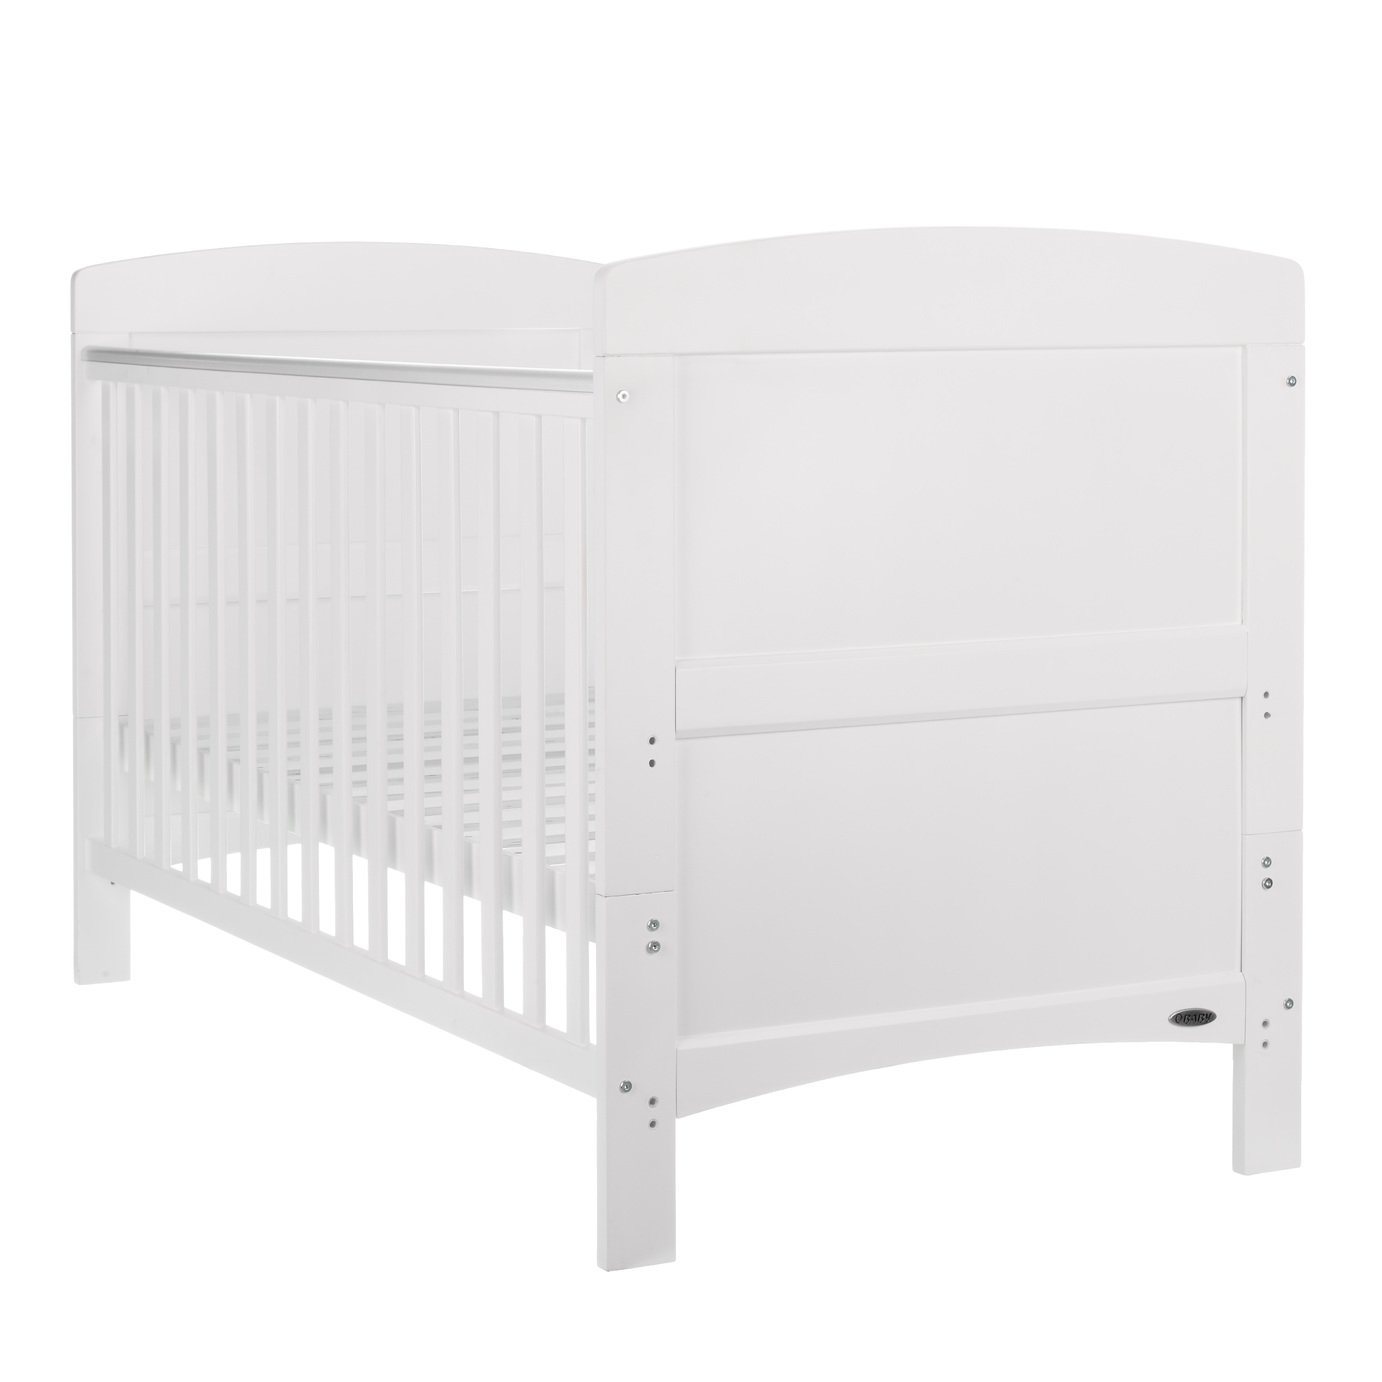 obaby grace cot bed grey